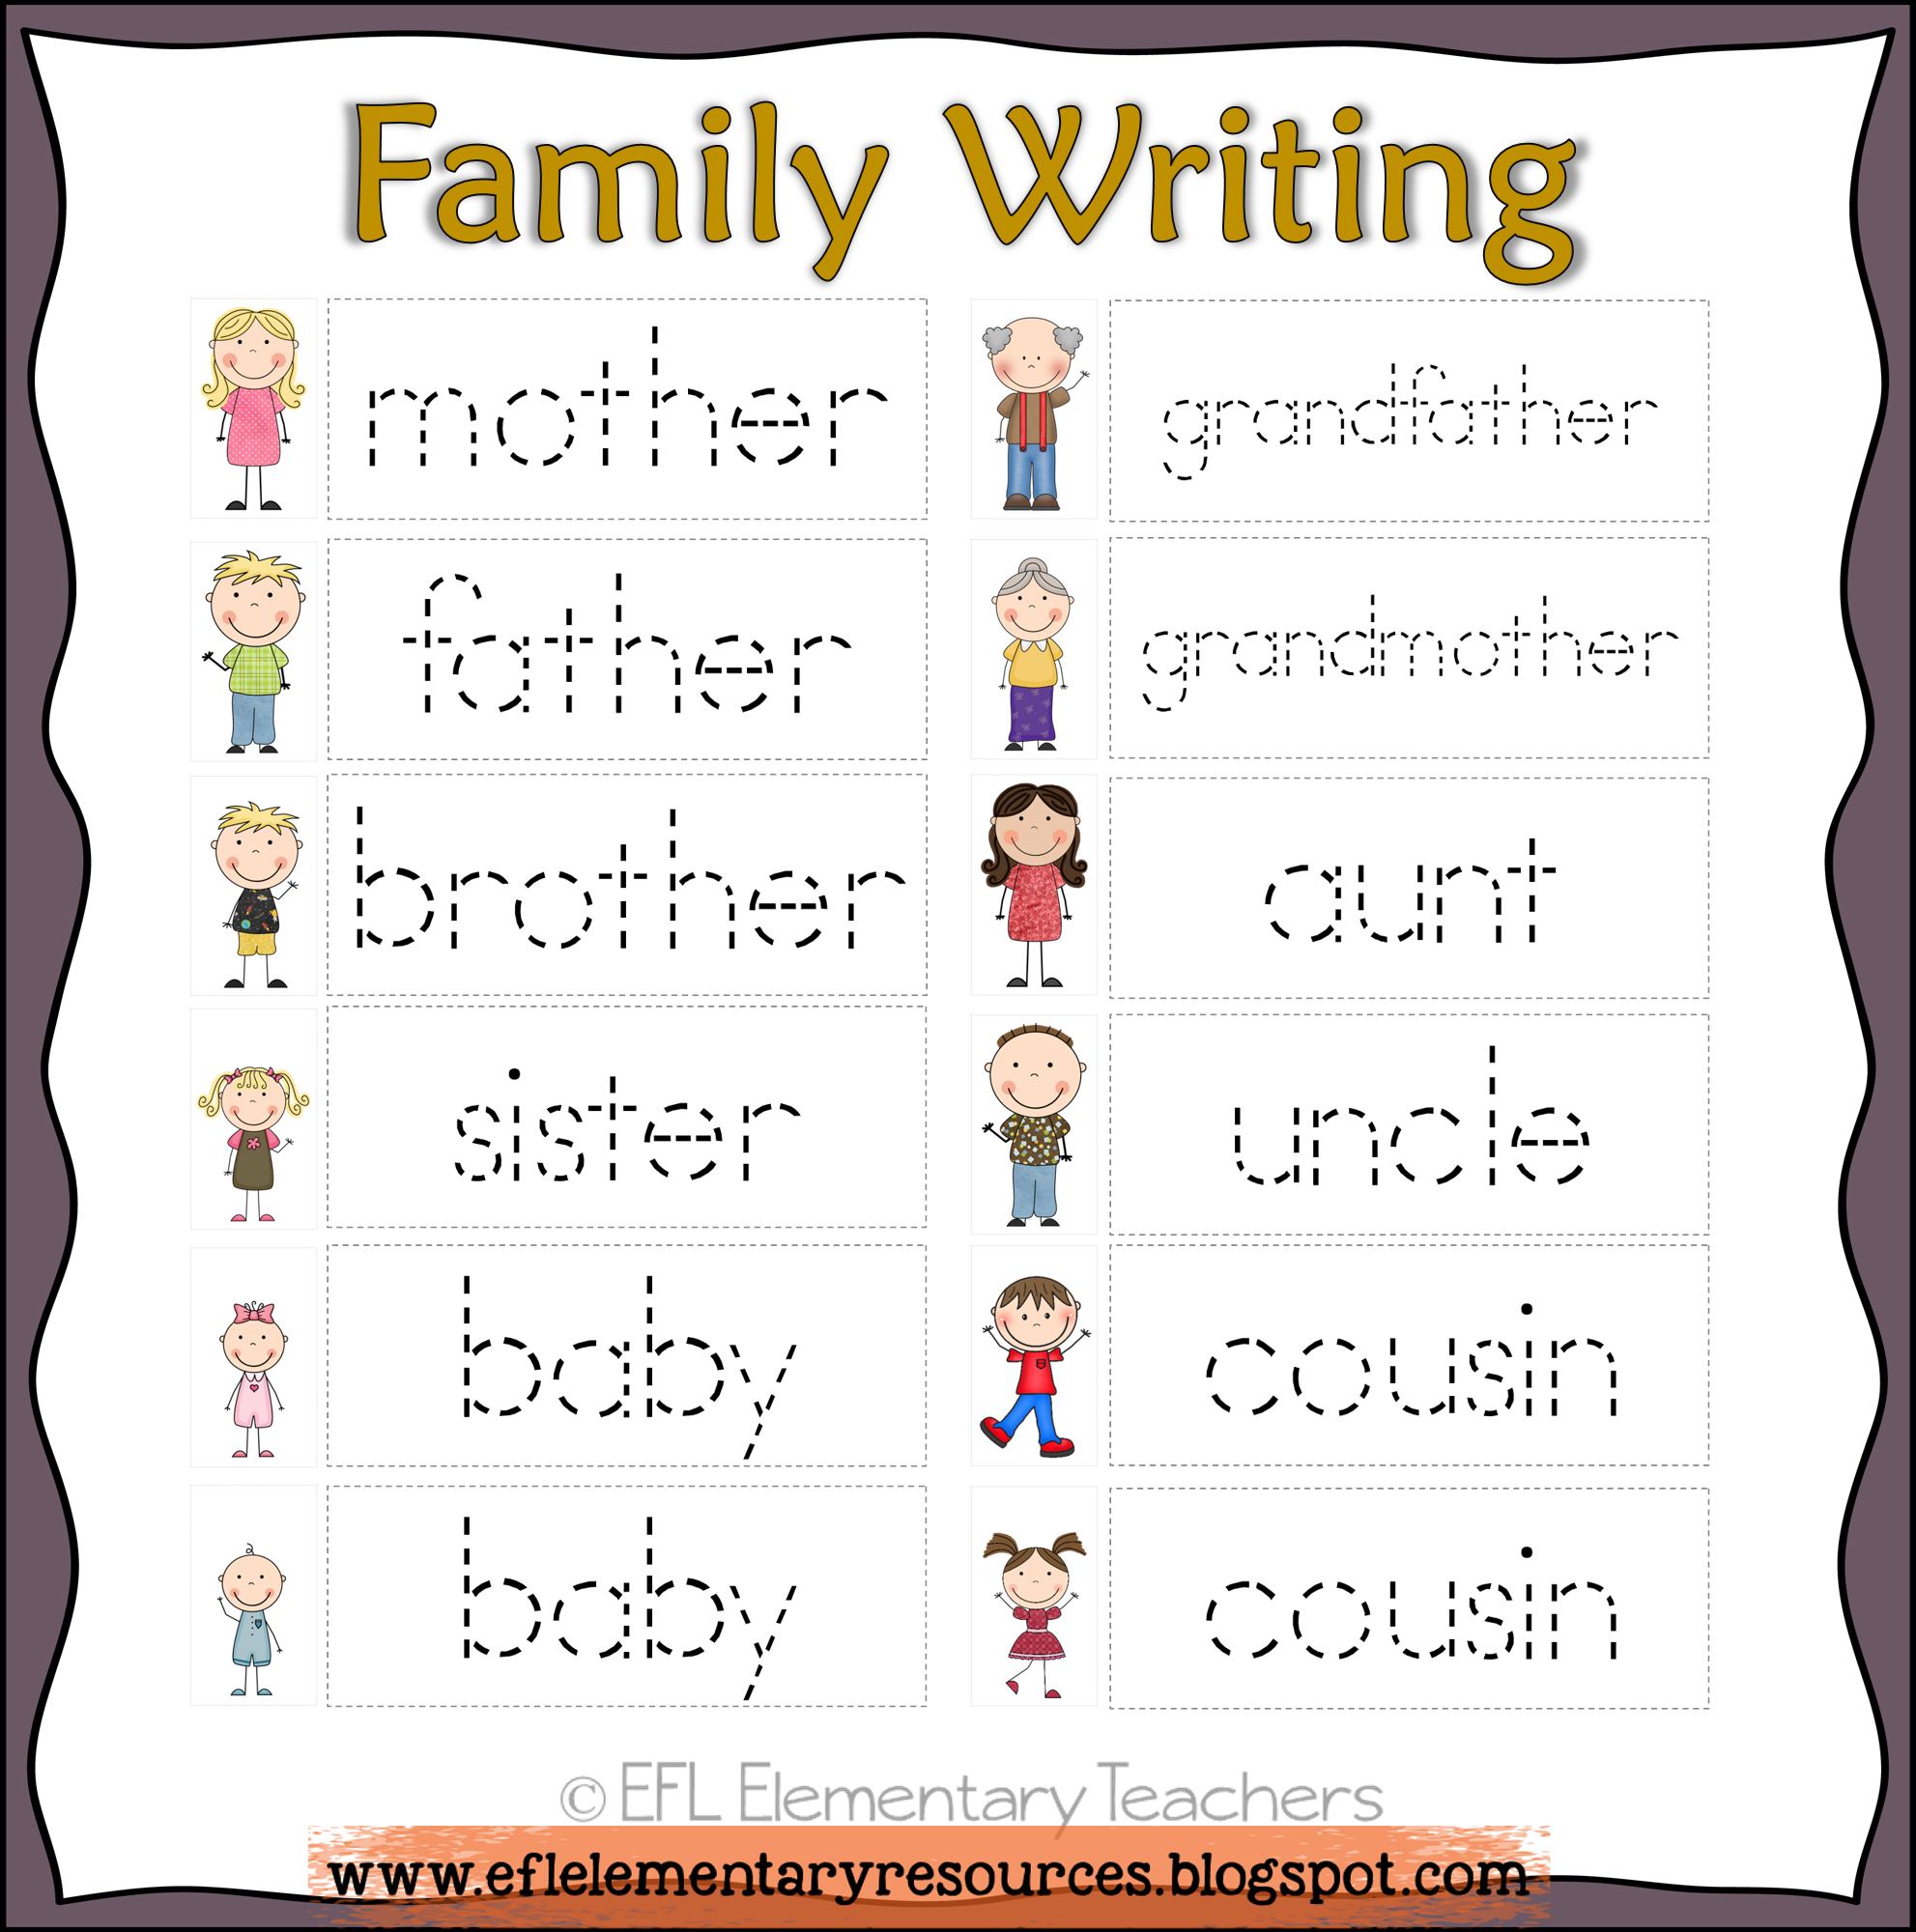 Family Worksheets For Esl Students. Writing Cards. There Are